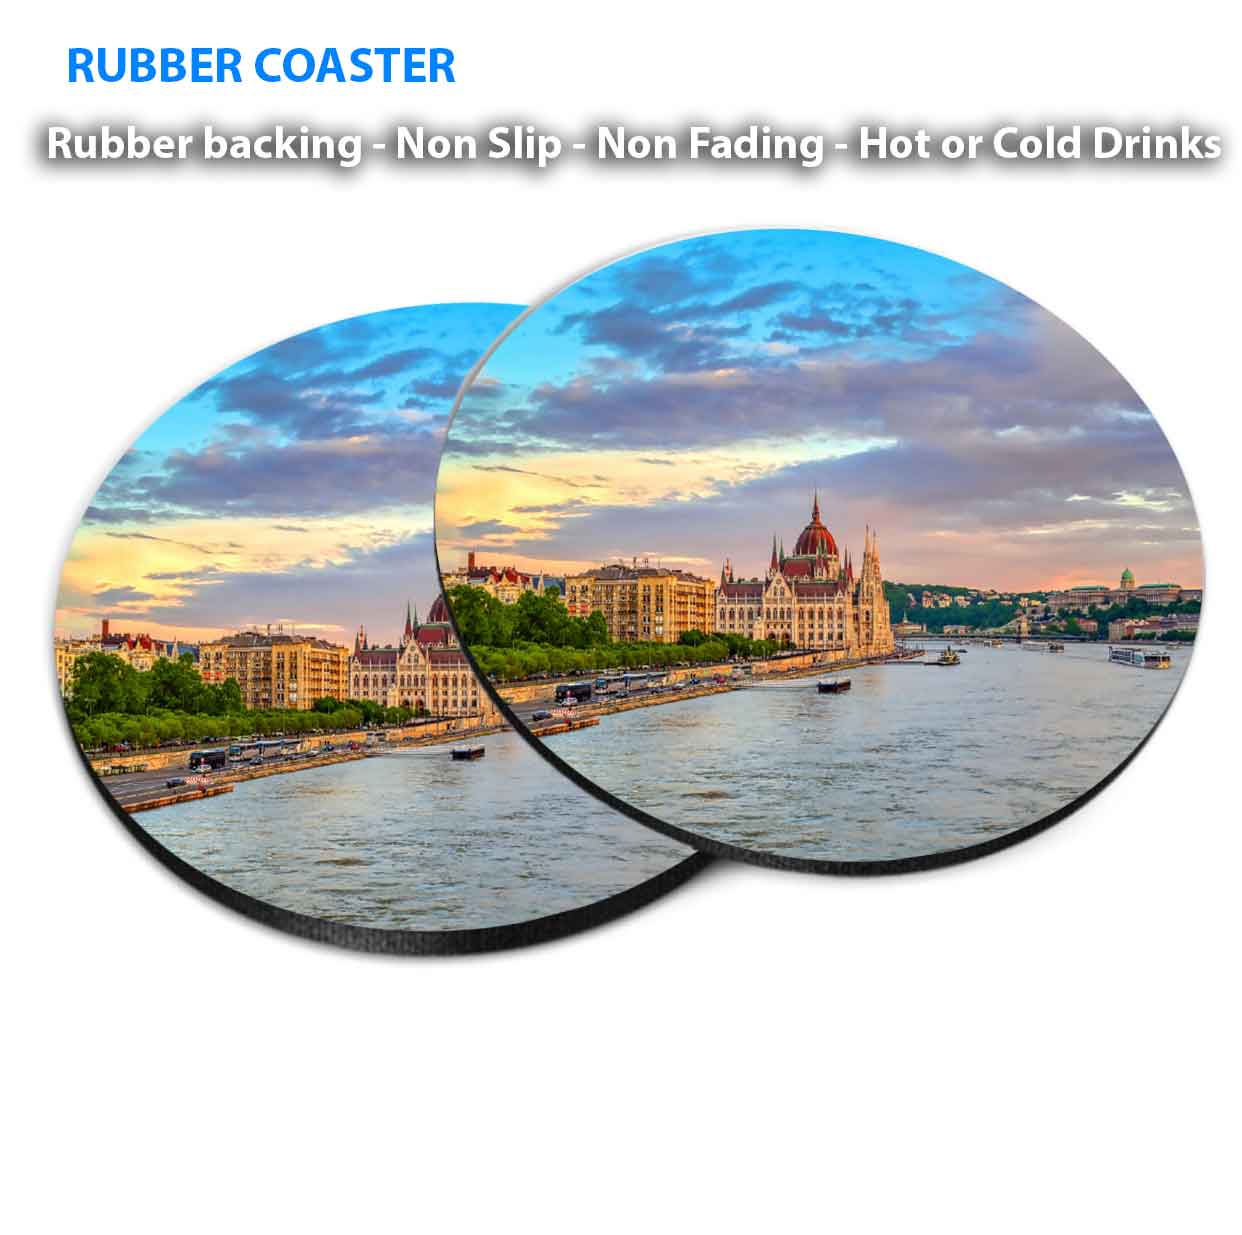 The Hungarian Parliament Building Coasters Wood & Rubber - Set of 6 Coasters